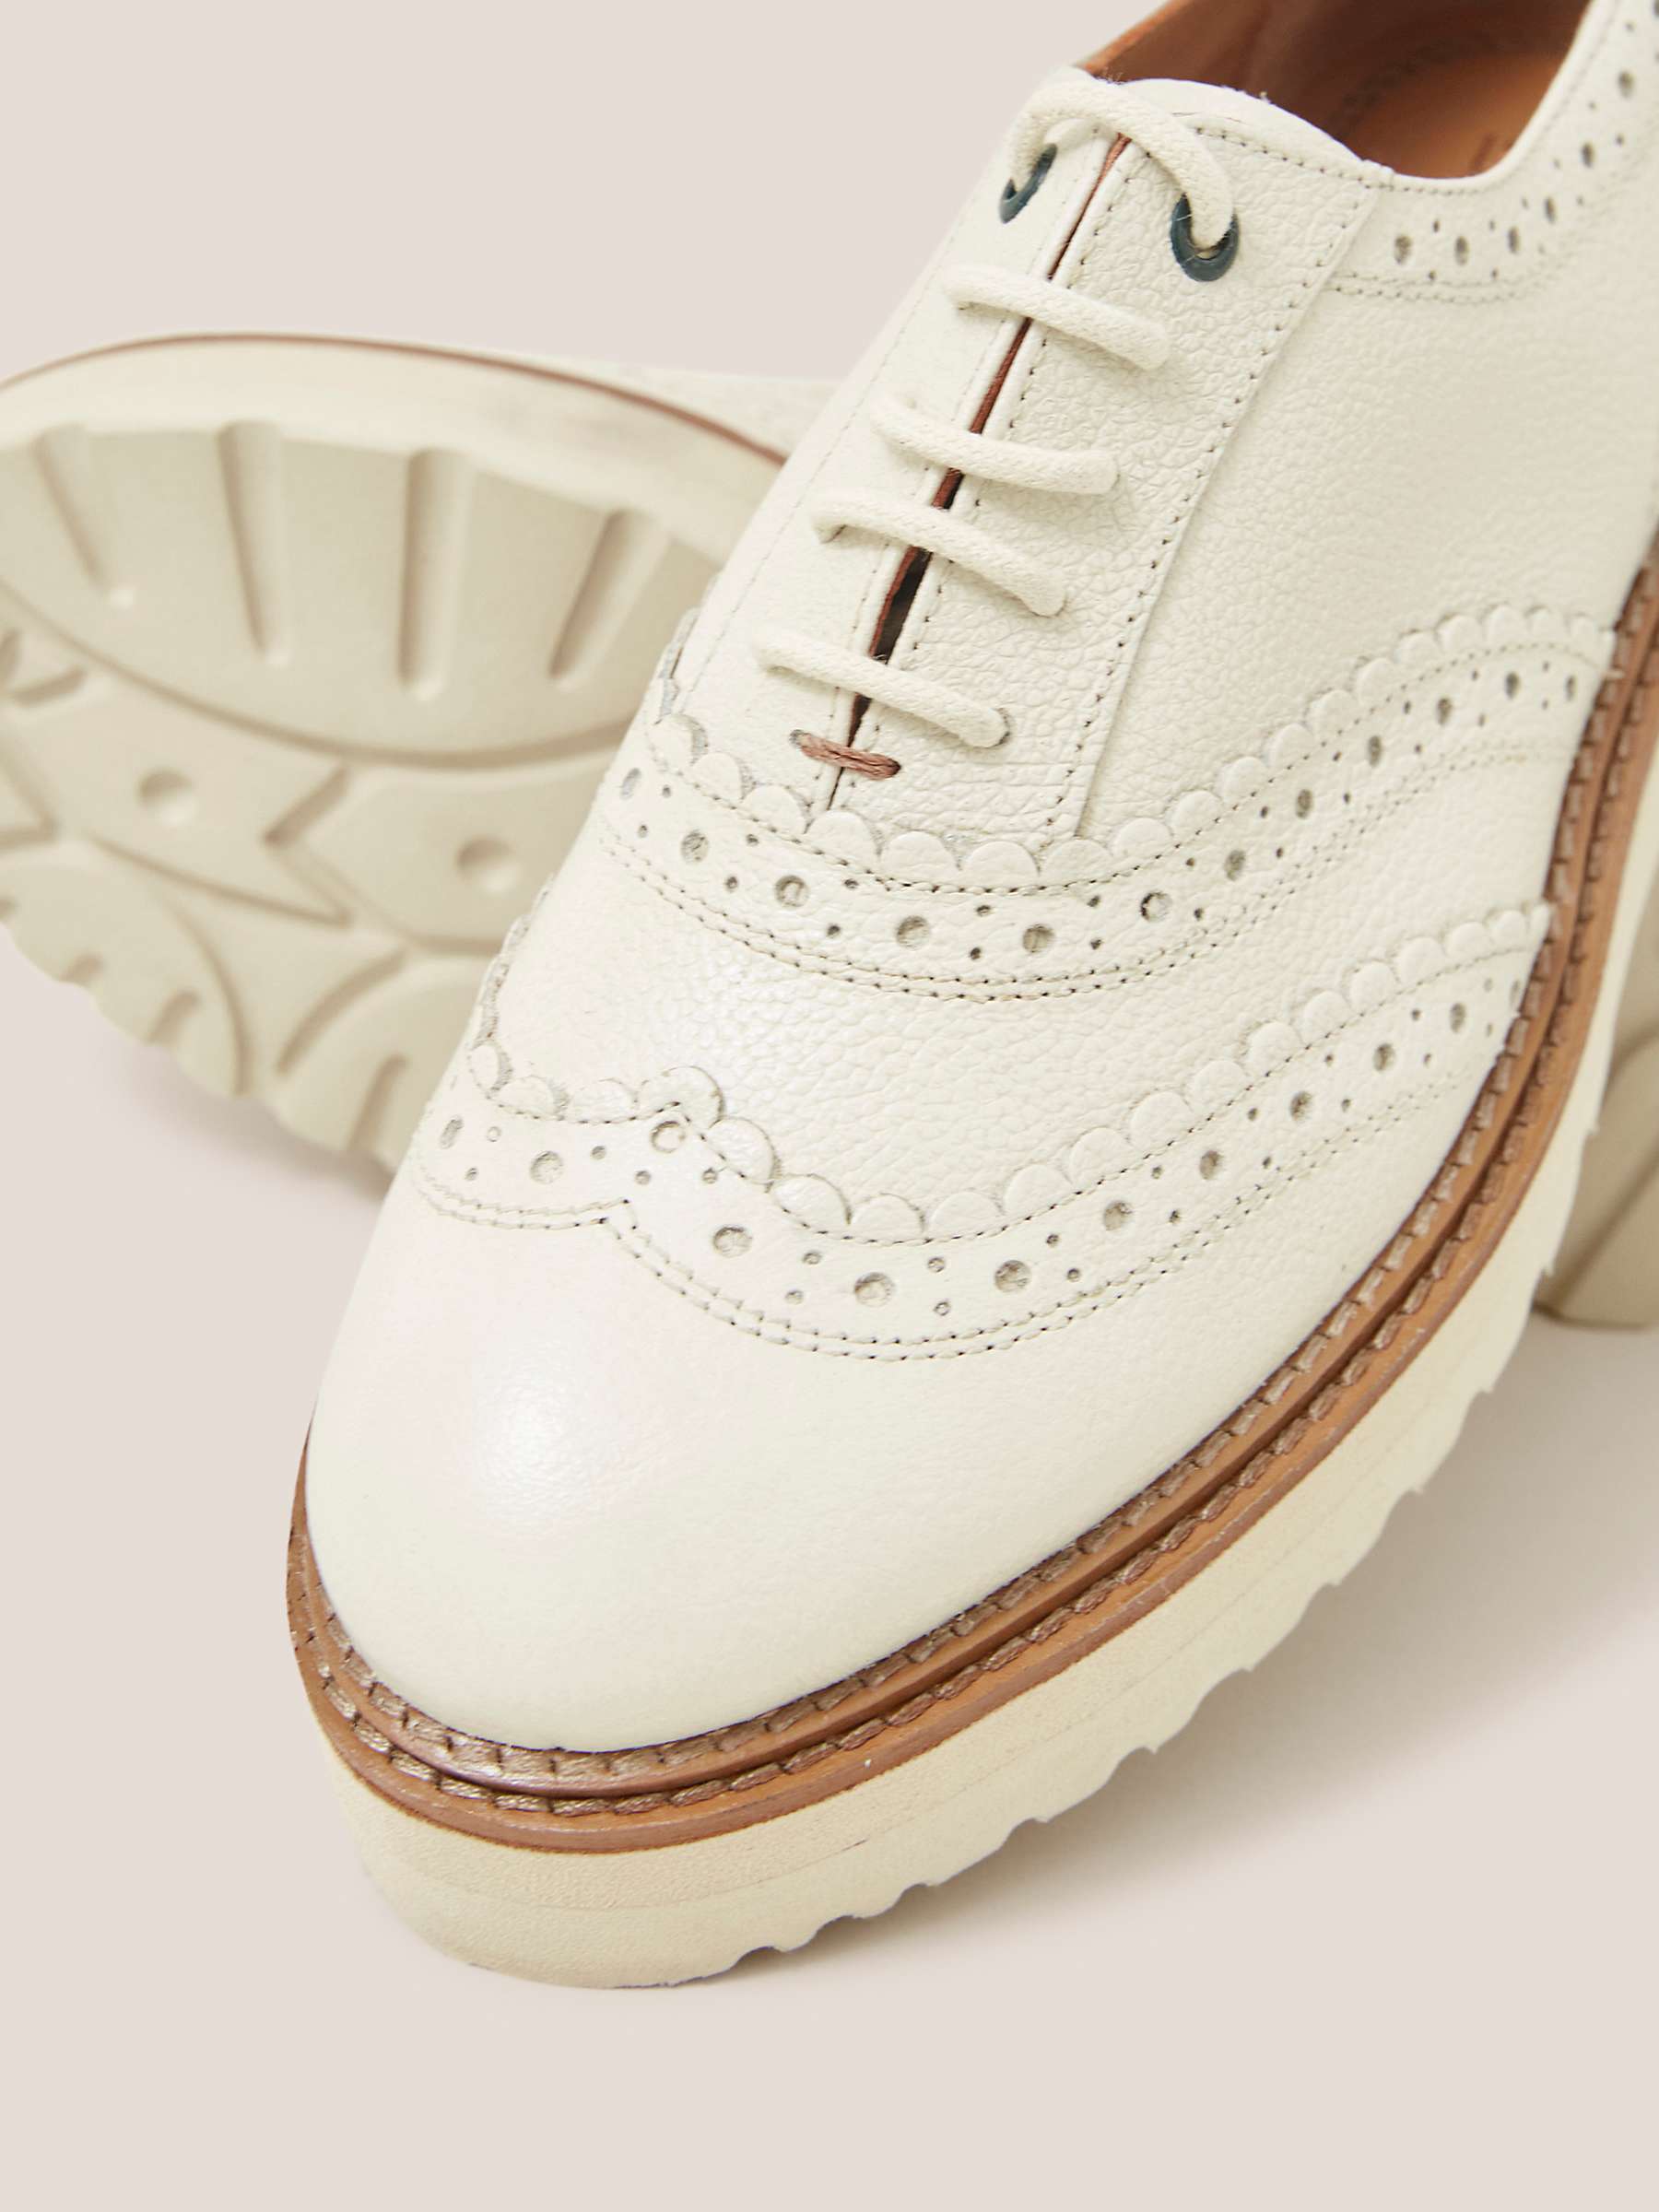 Buy White Stuff Leather Lace Up Brogue Shoes Online at johnlewis.com